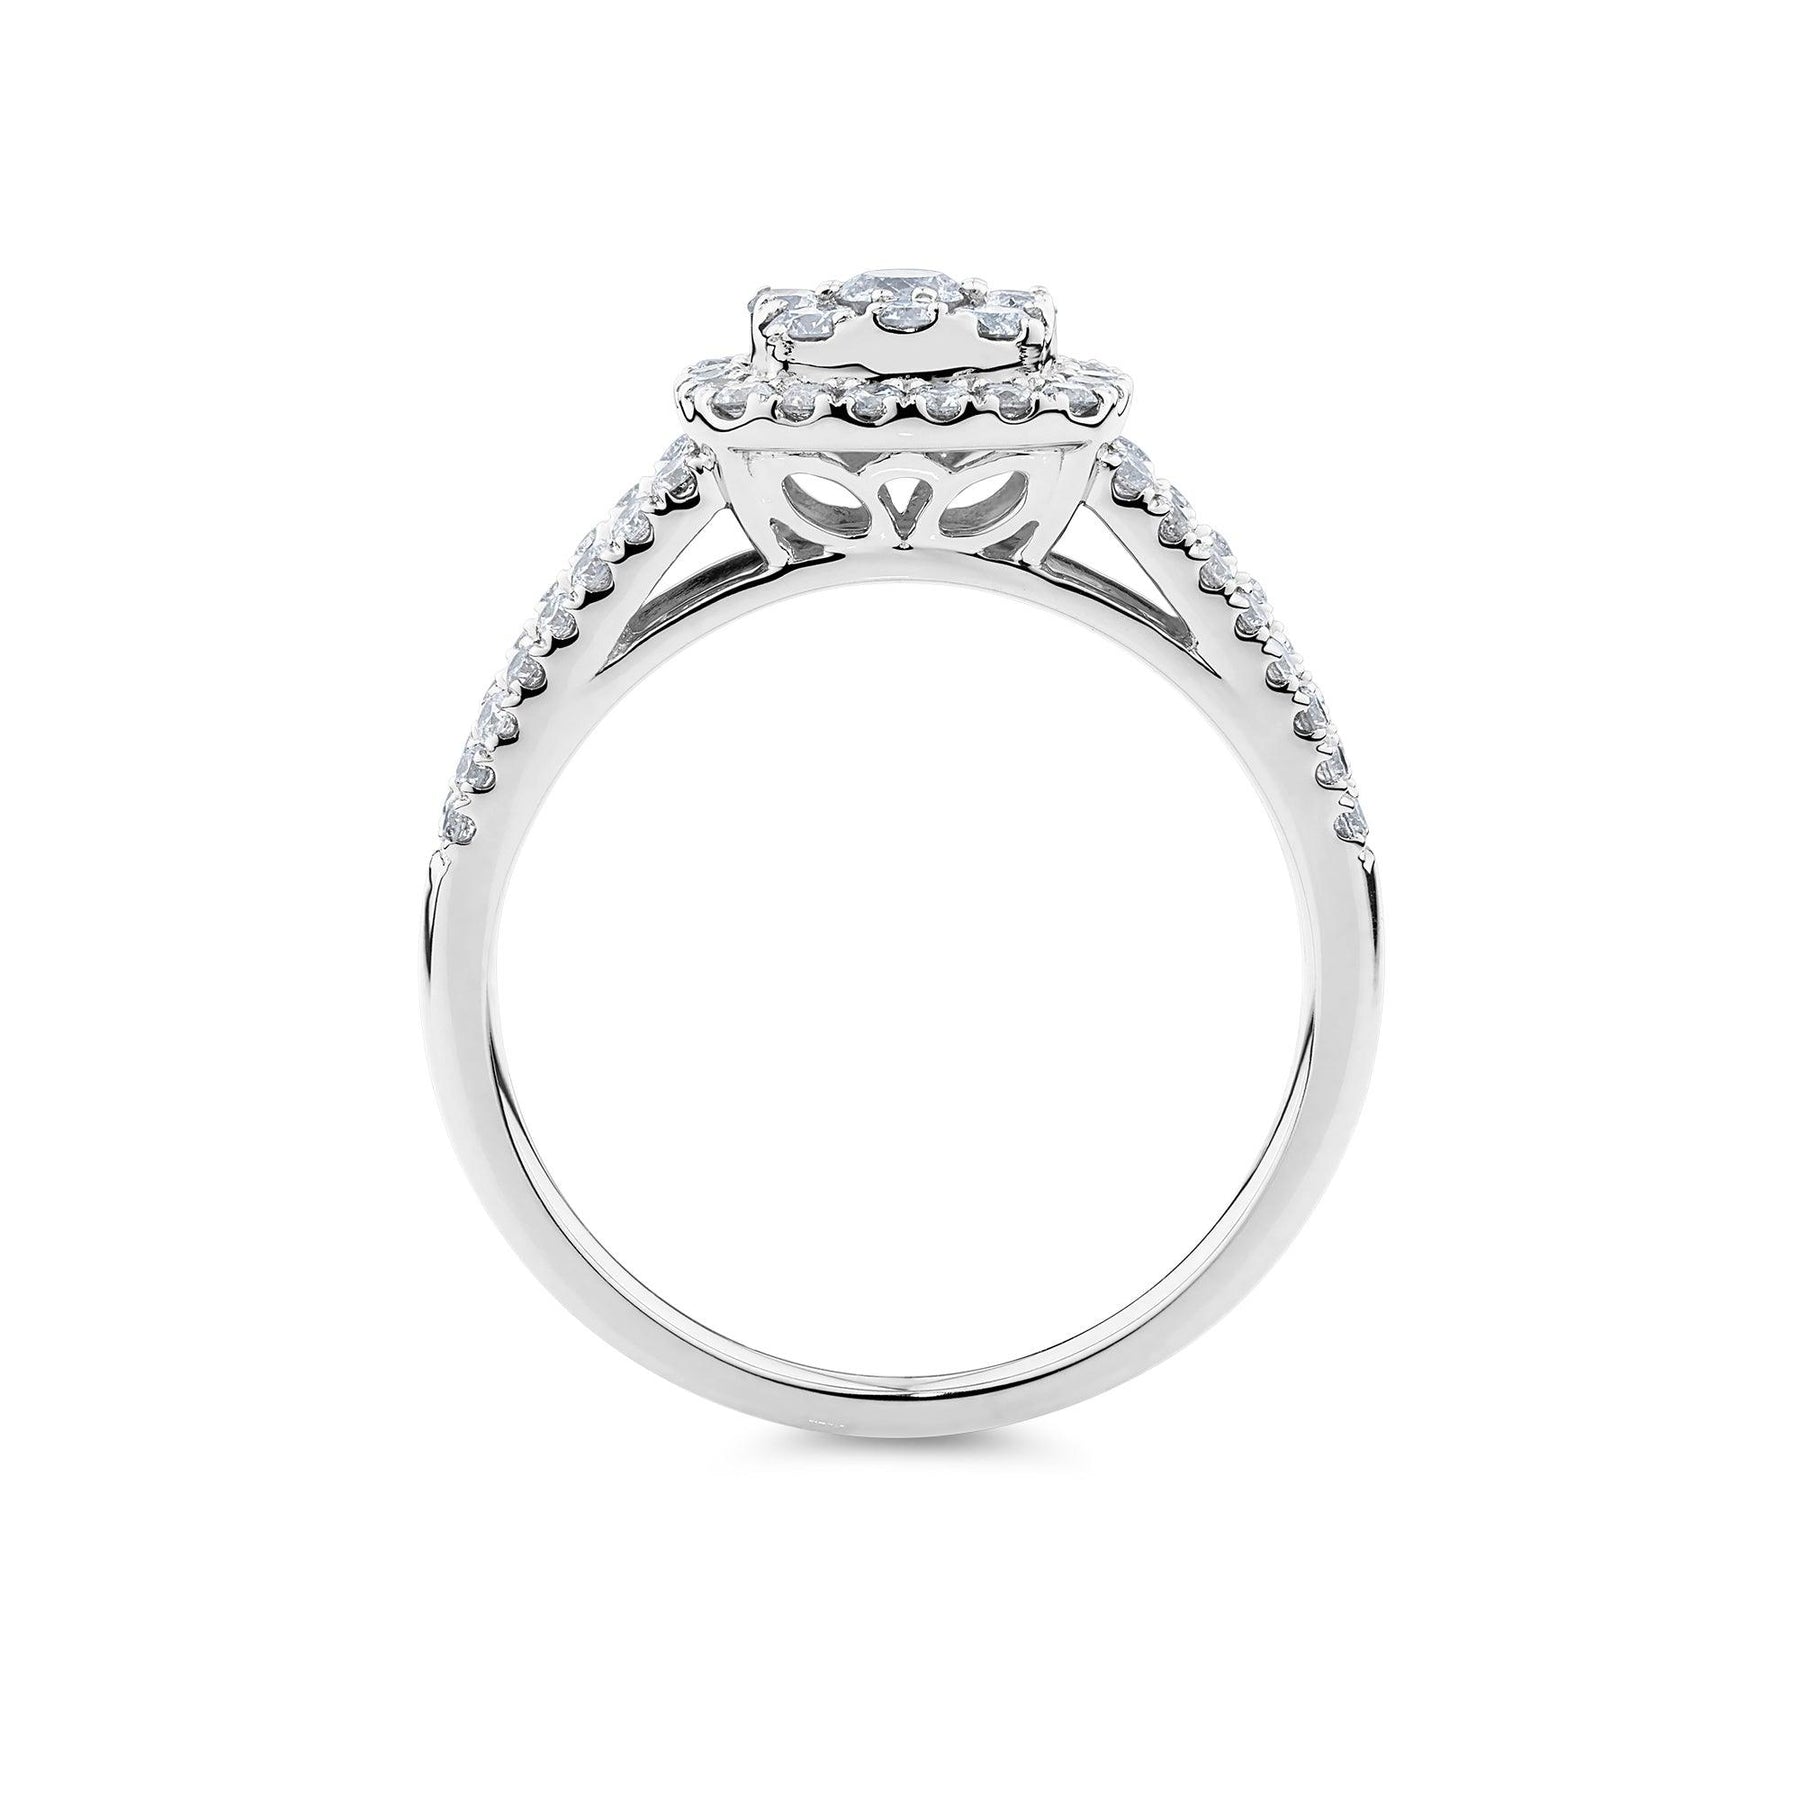 1ct TW Diamond Square Halo Engagement Ring in 9ct White Gold - Wallace Bishop